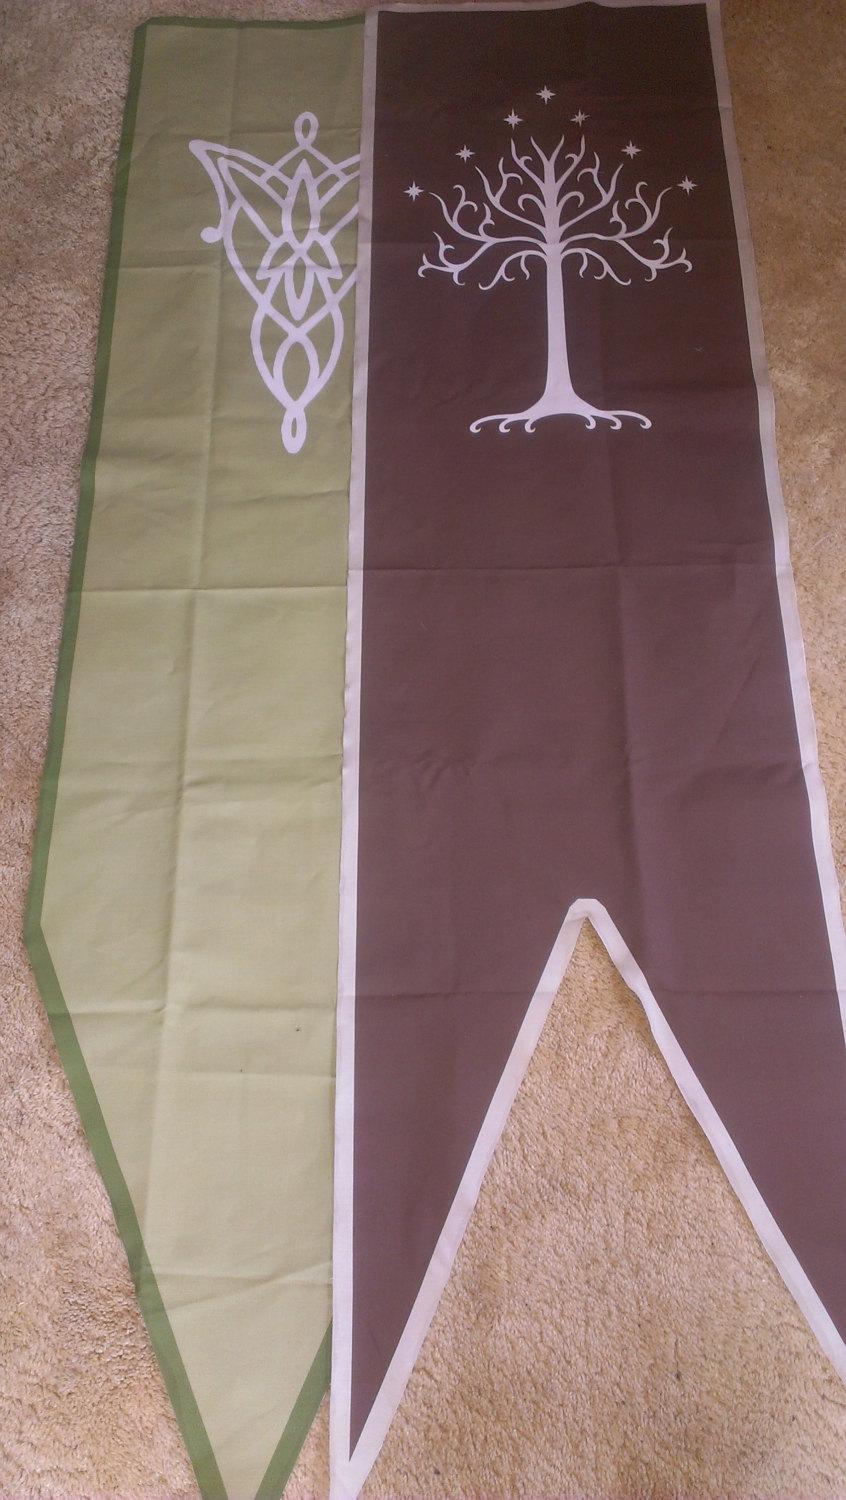 Wedding - Lord of the Rings Wedding Banners Arwen Evenstar Aragorn White Tree of Gondor